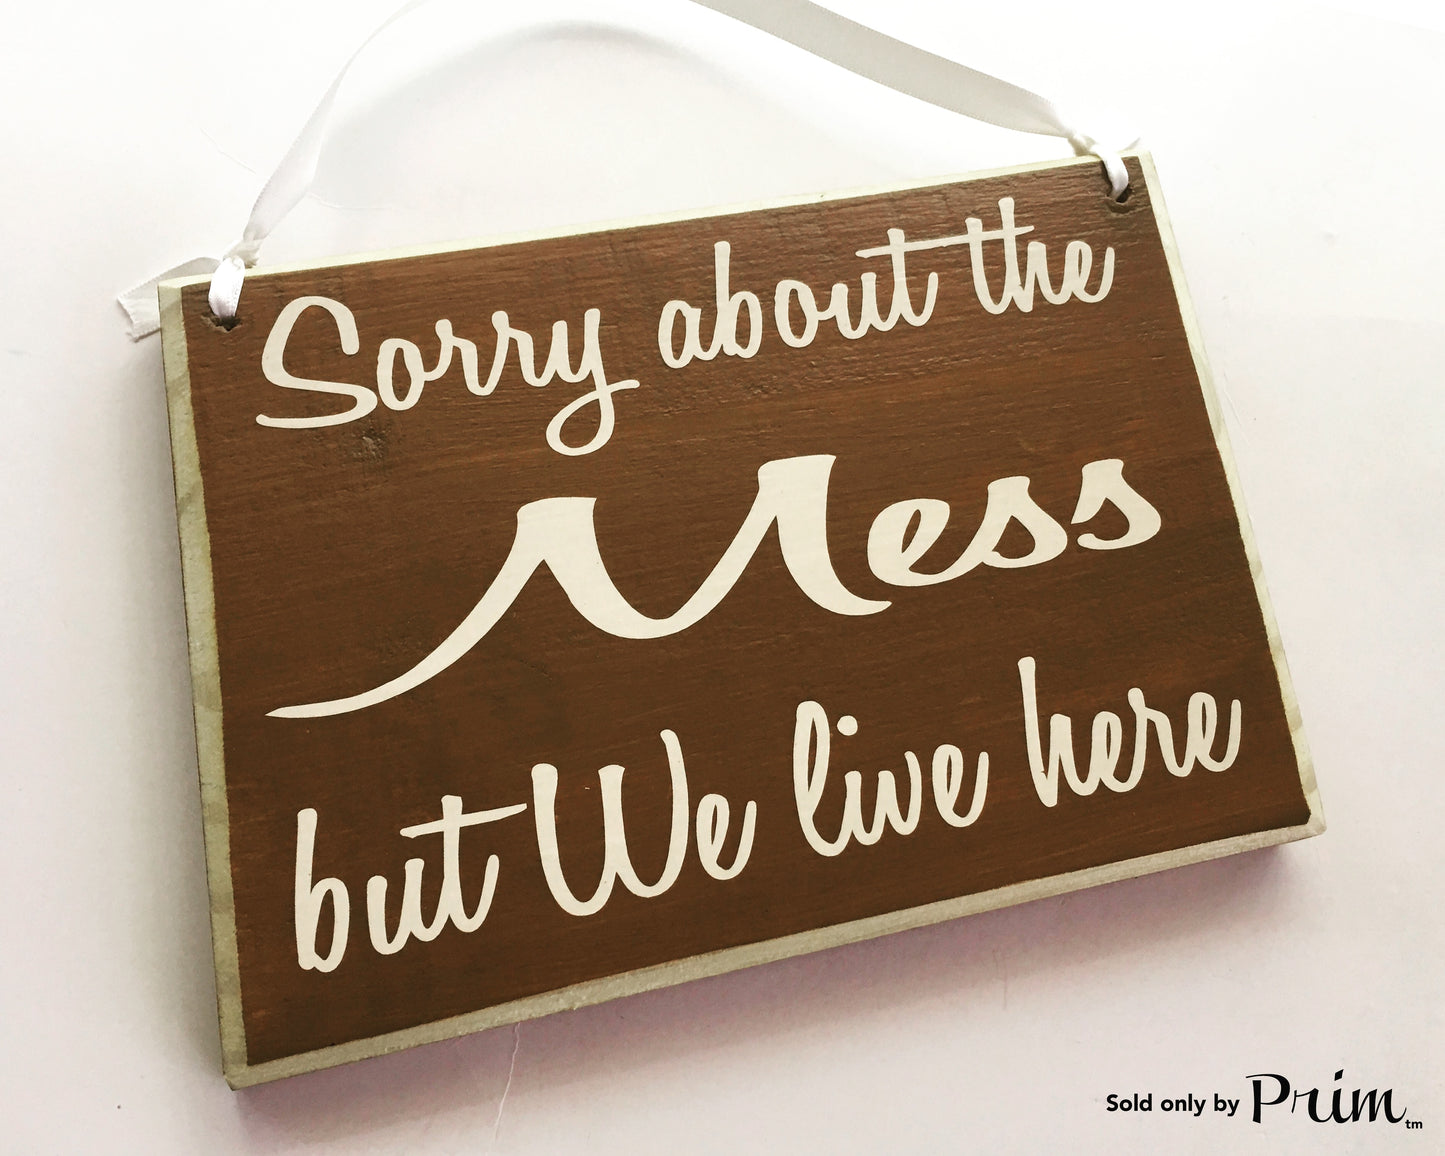 8x6 Sorry About The Mess But We Live Here Custom Wood Sign Home Sweet Home Funny Humor Family sign